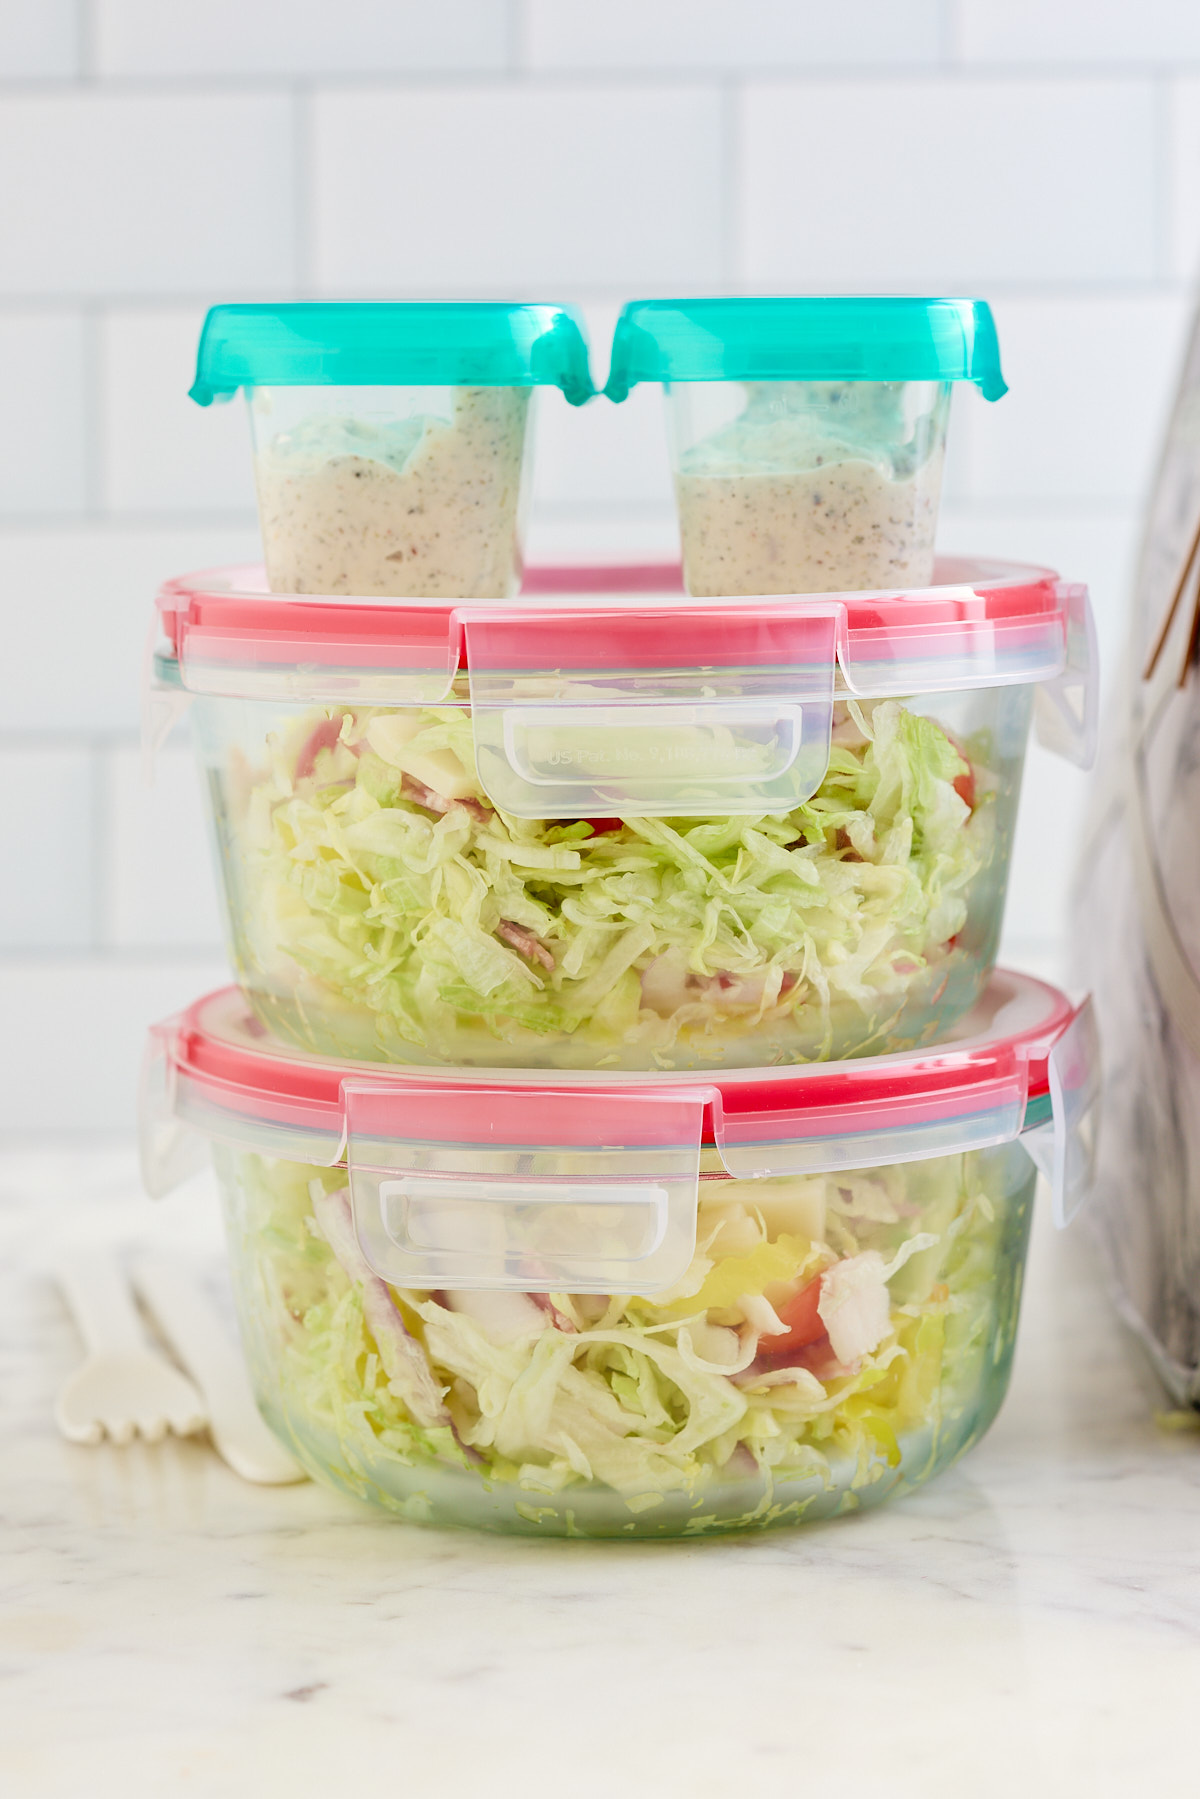 grinder salad packed containers stacked on top of each other 